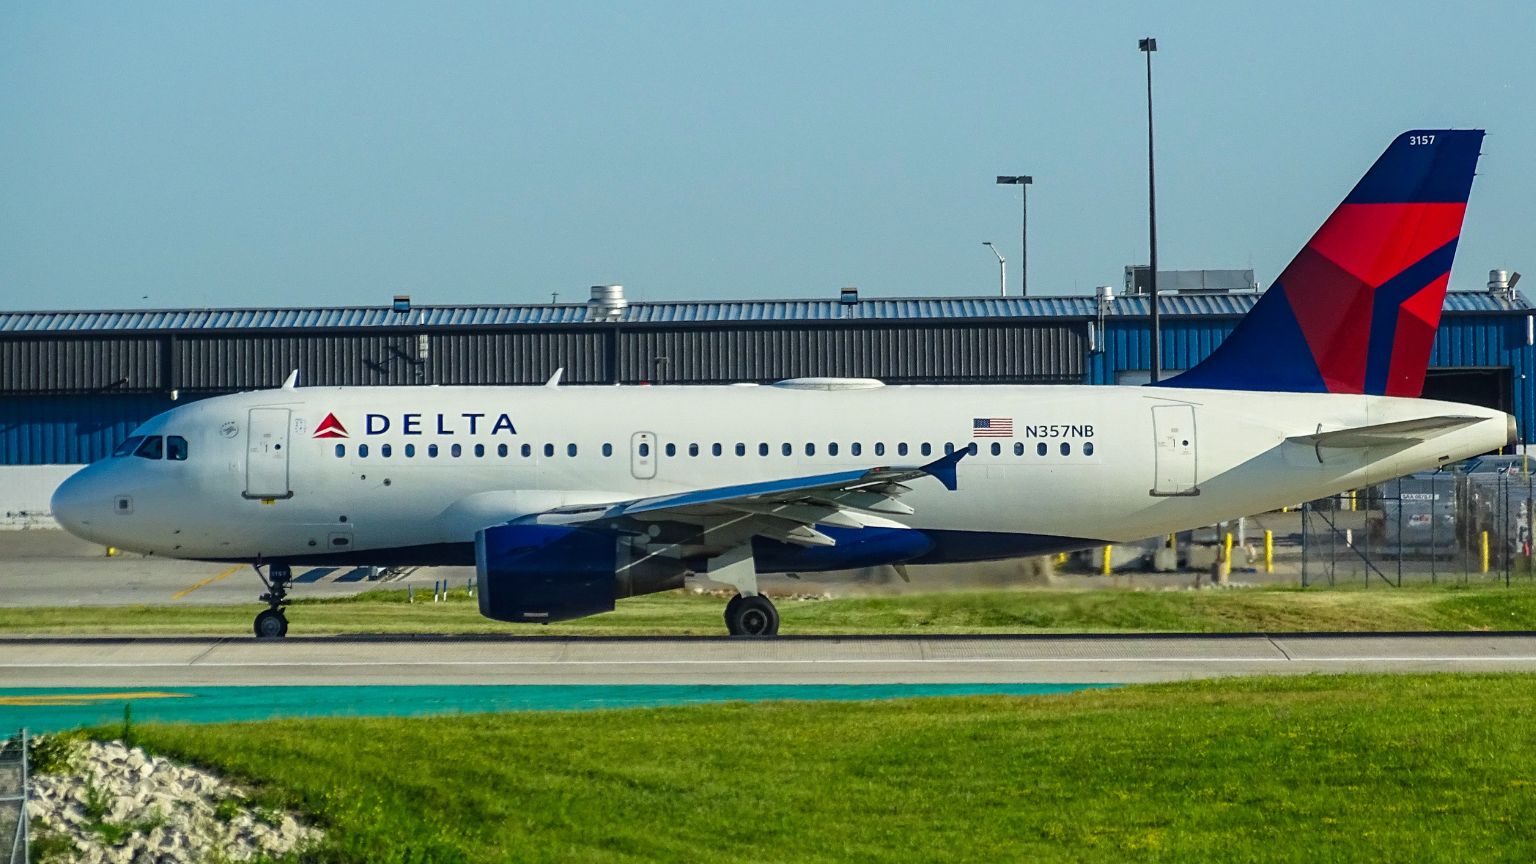 Former Delta Airlines attendant sues after being fired for anti-Trump meme